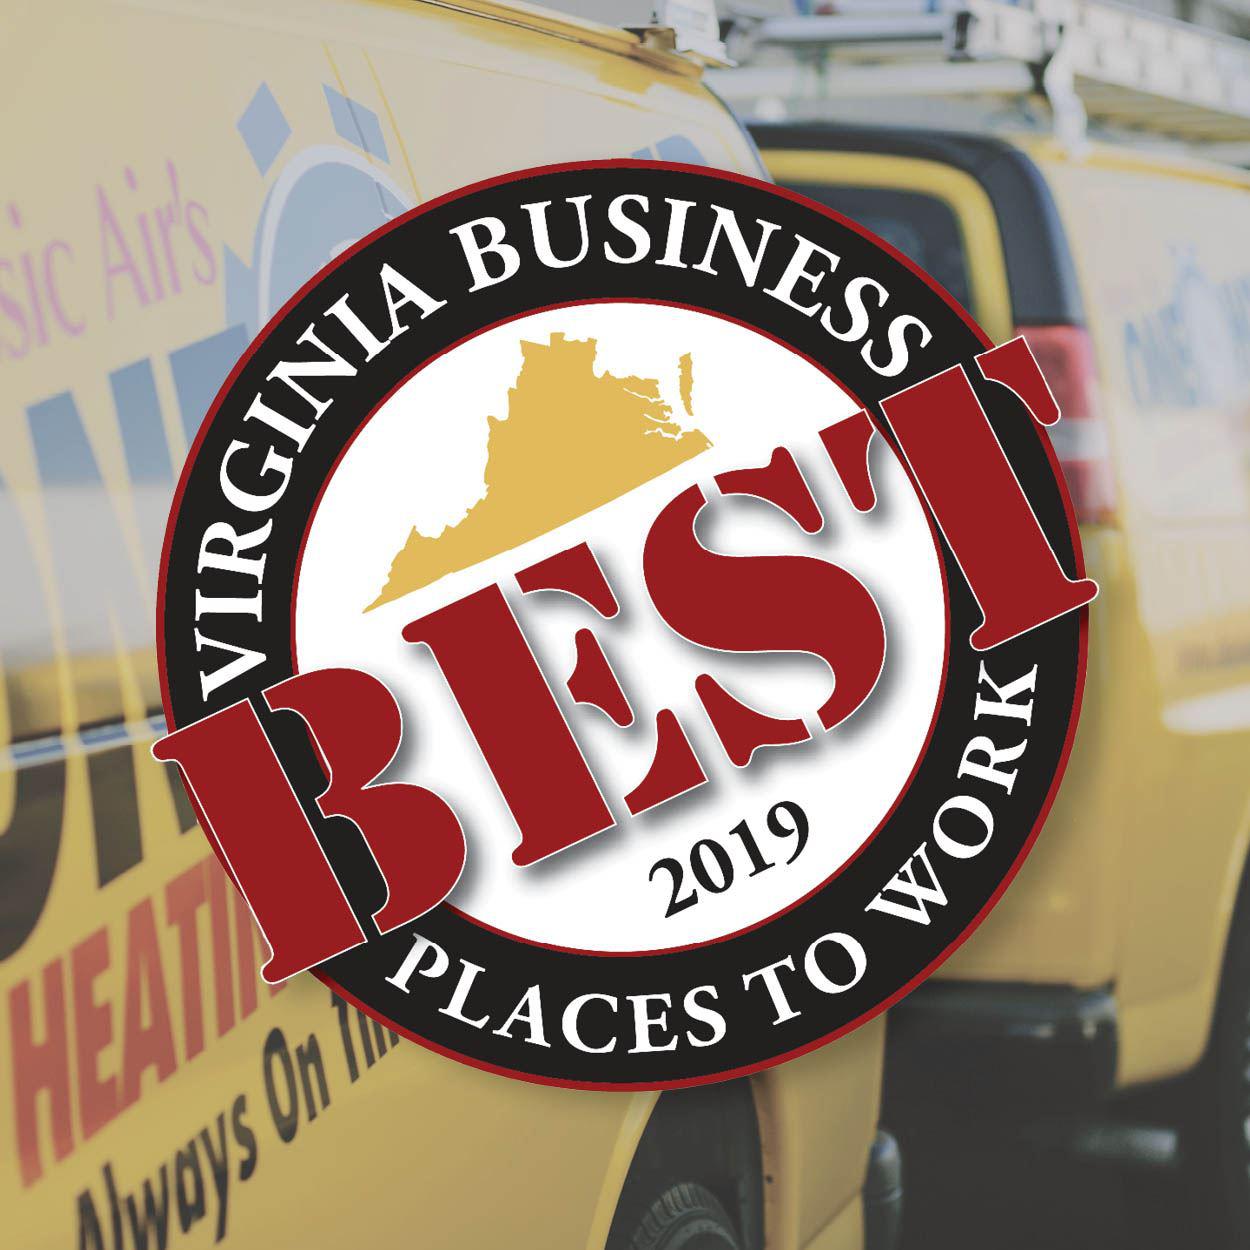 One of the 2019 Best Places to Work in Virginia